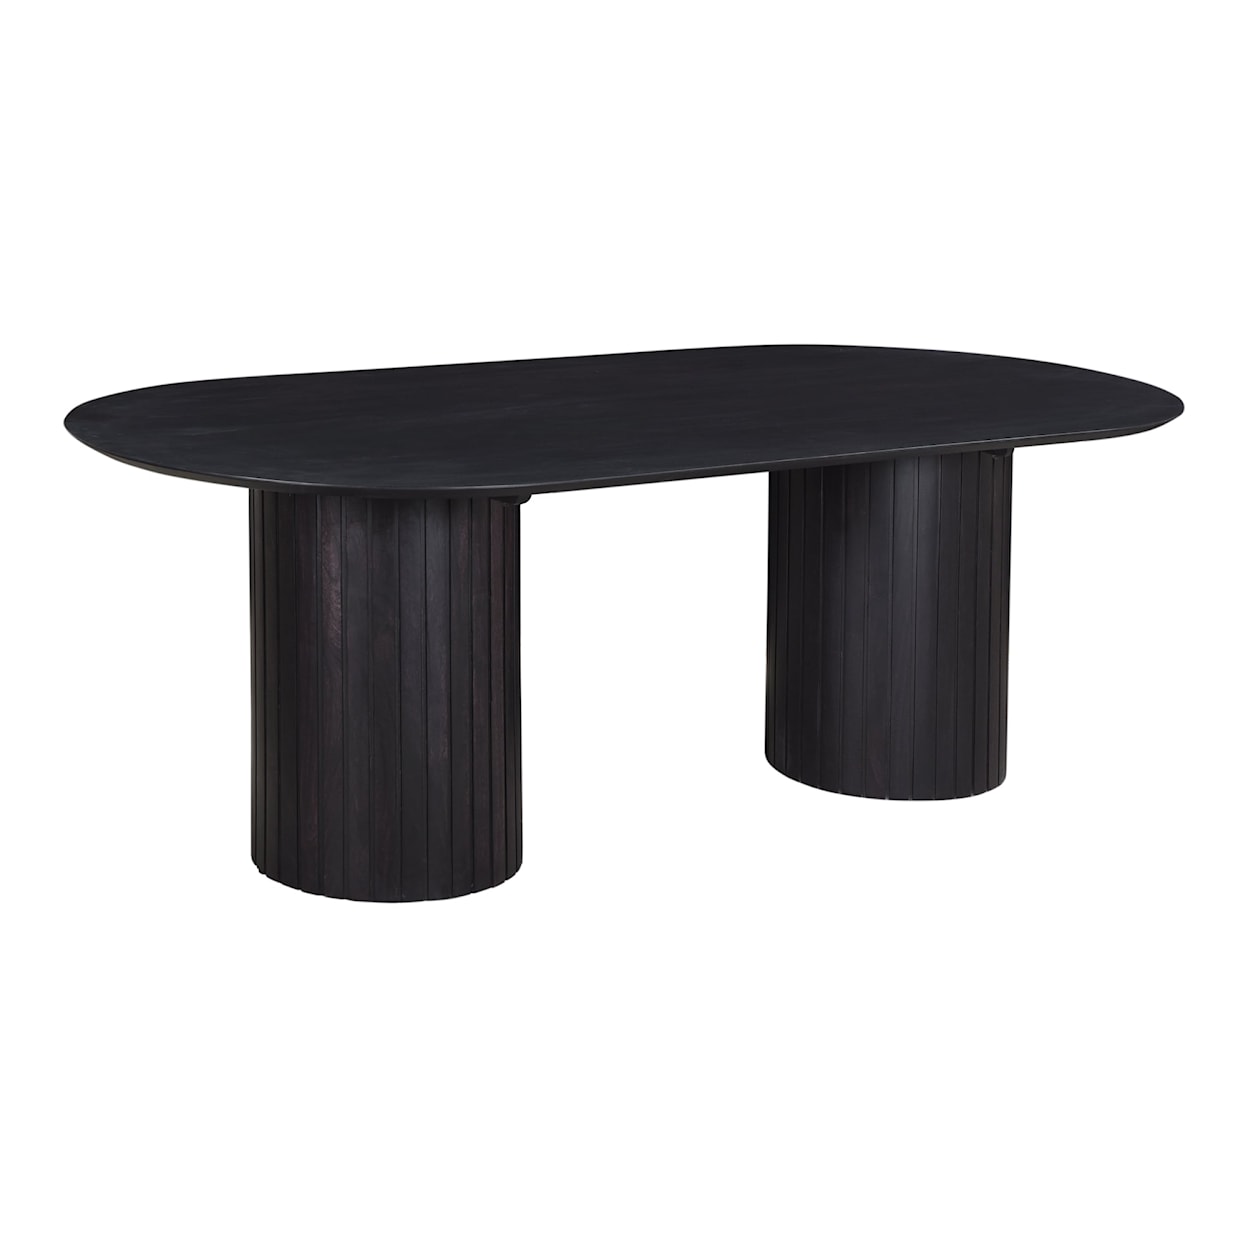 Moe's Home Collection Povera Solid Acacia Wood Dining Table